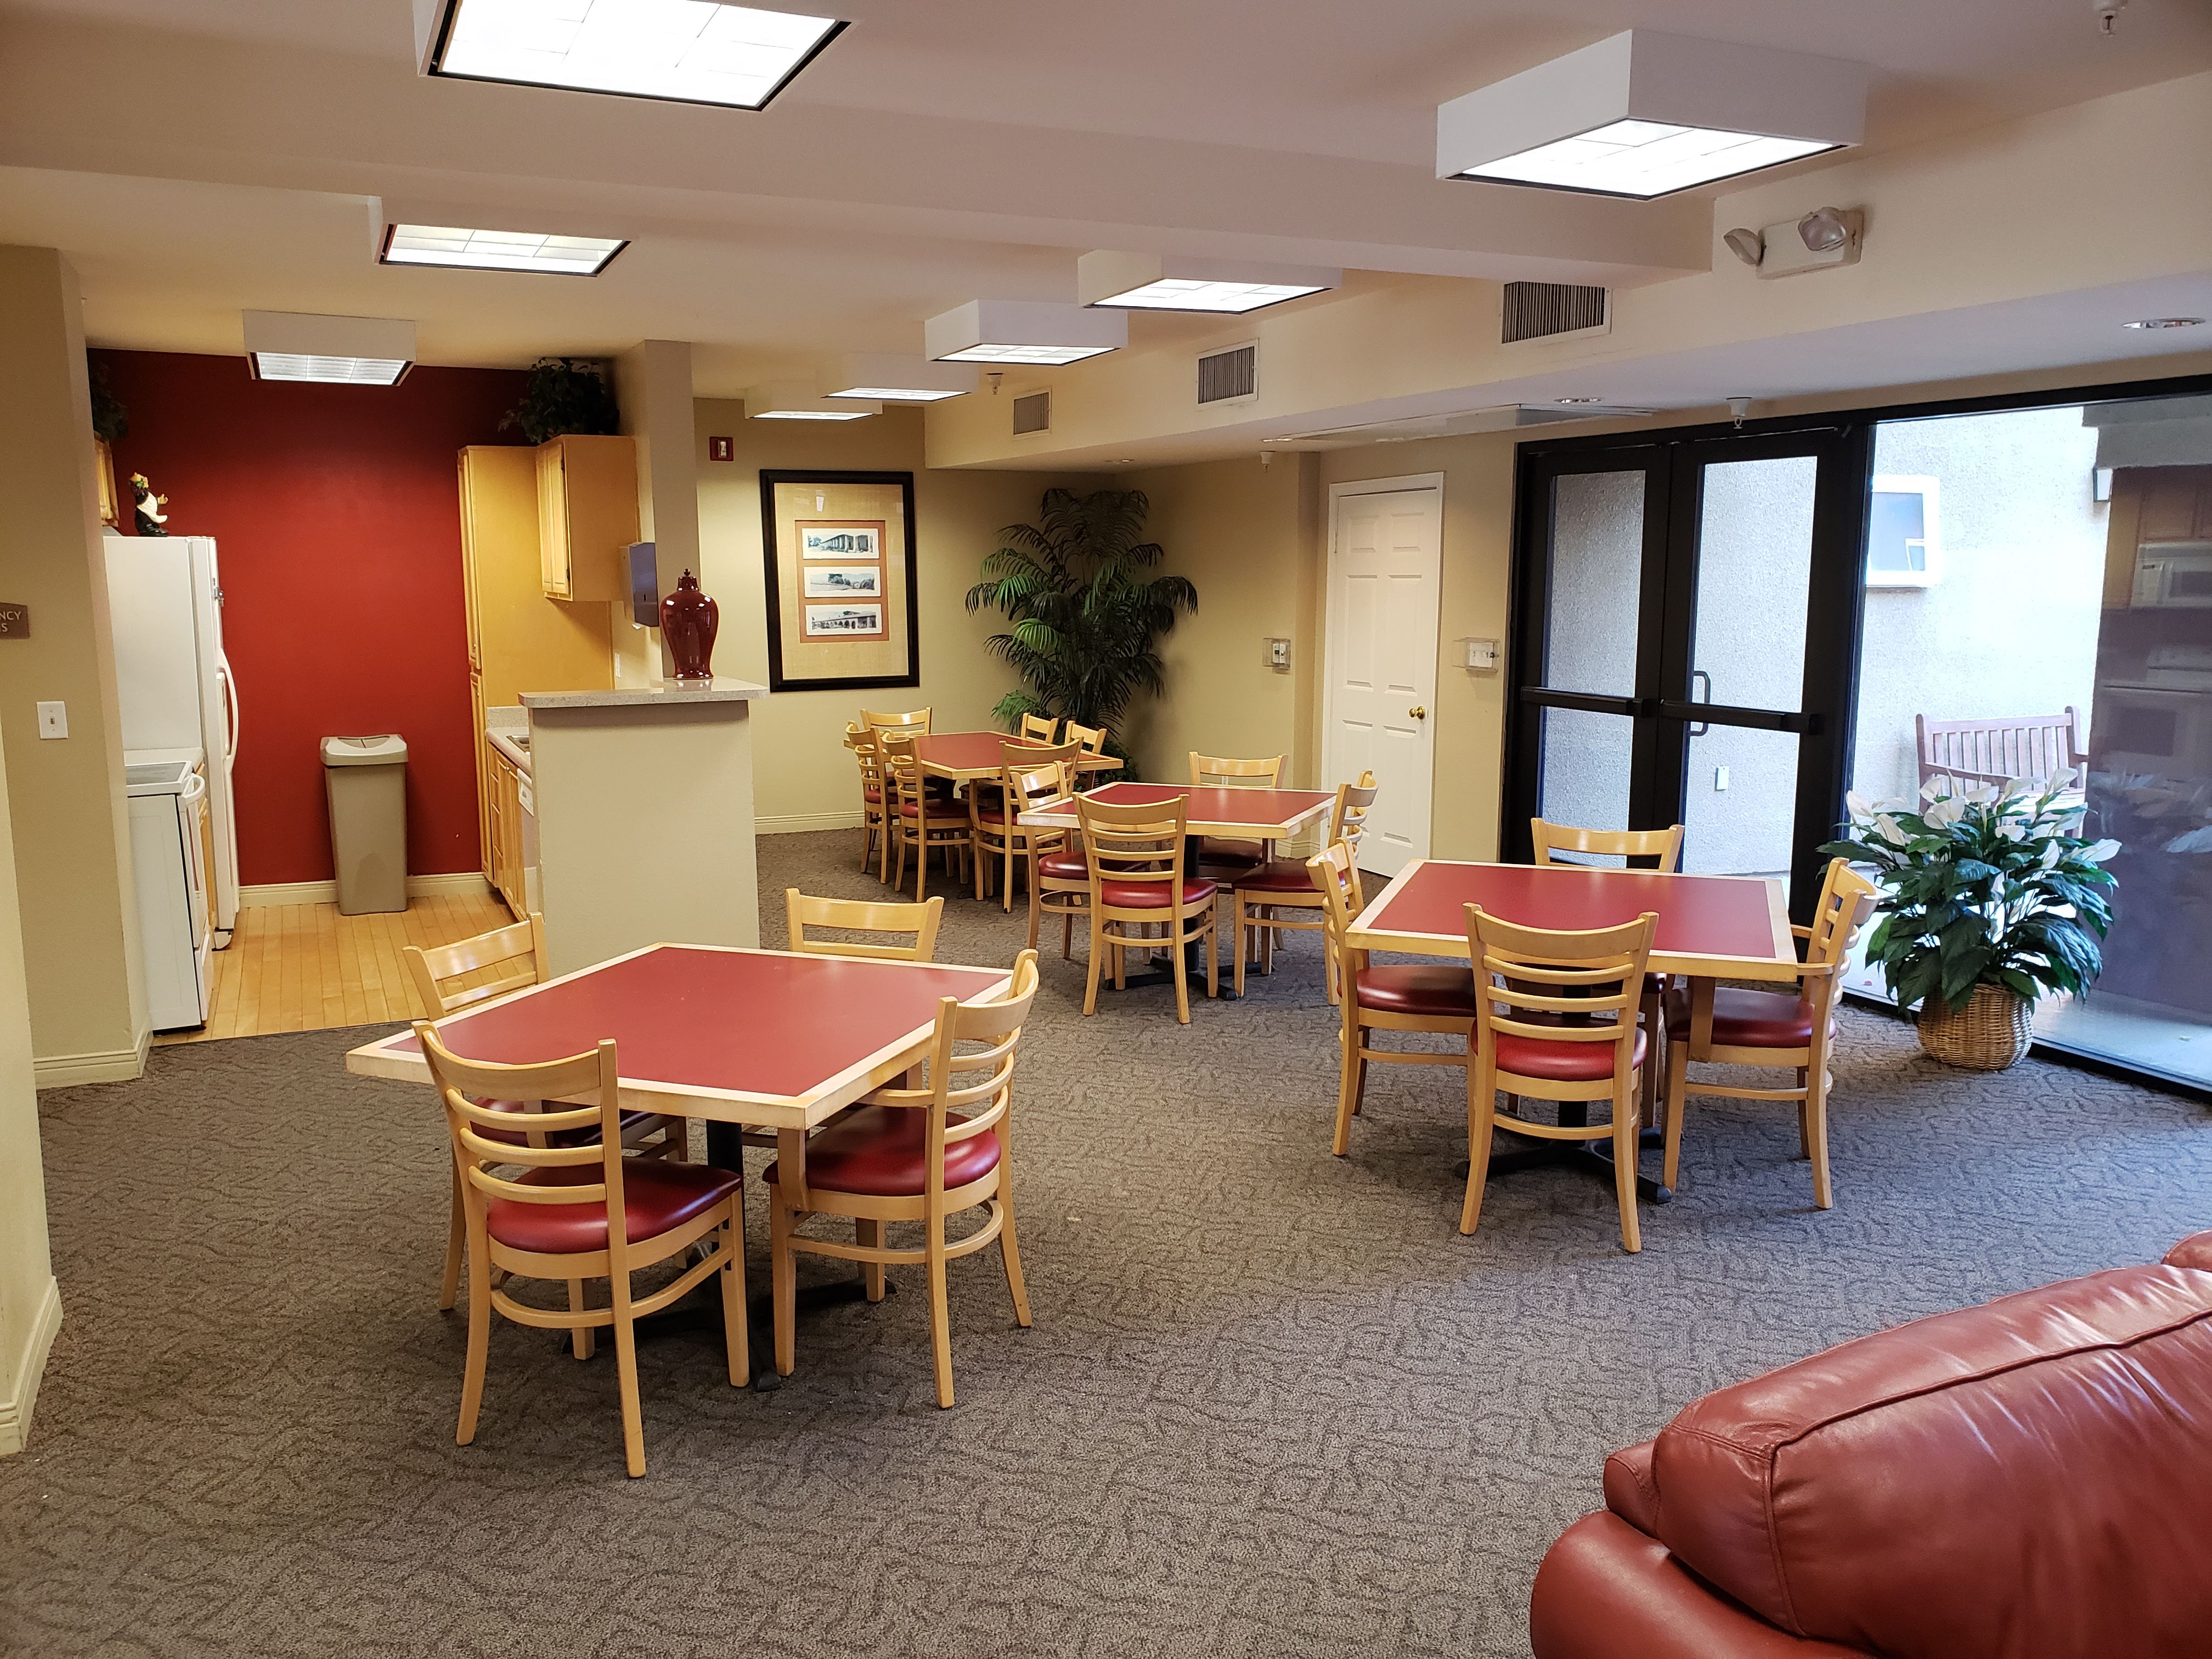 Image of vintage crossing senior apartments community room. Lots of lighting across ceiling. Large room with kitchen and several tables and chairs for lounging. Large glass double doors and windows that bring in a lot of natural lighting. Kitchen applianc